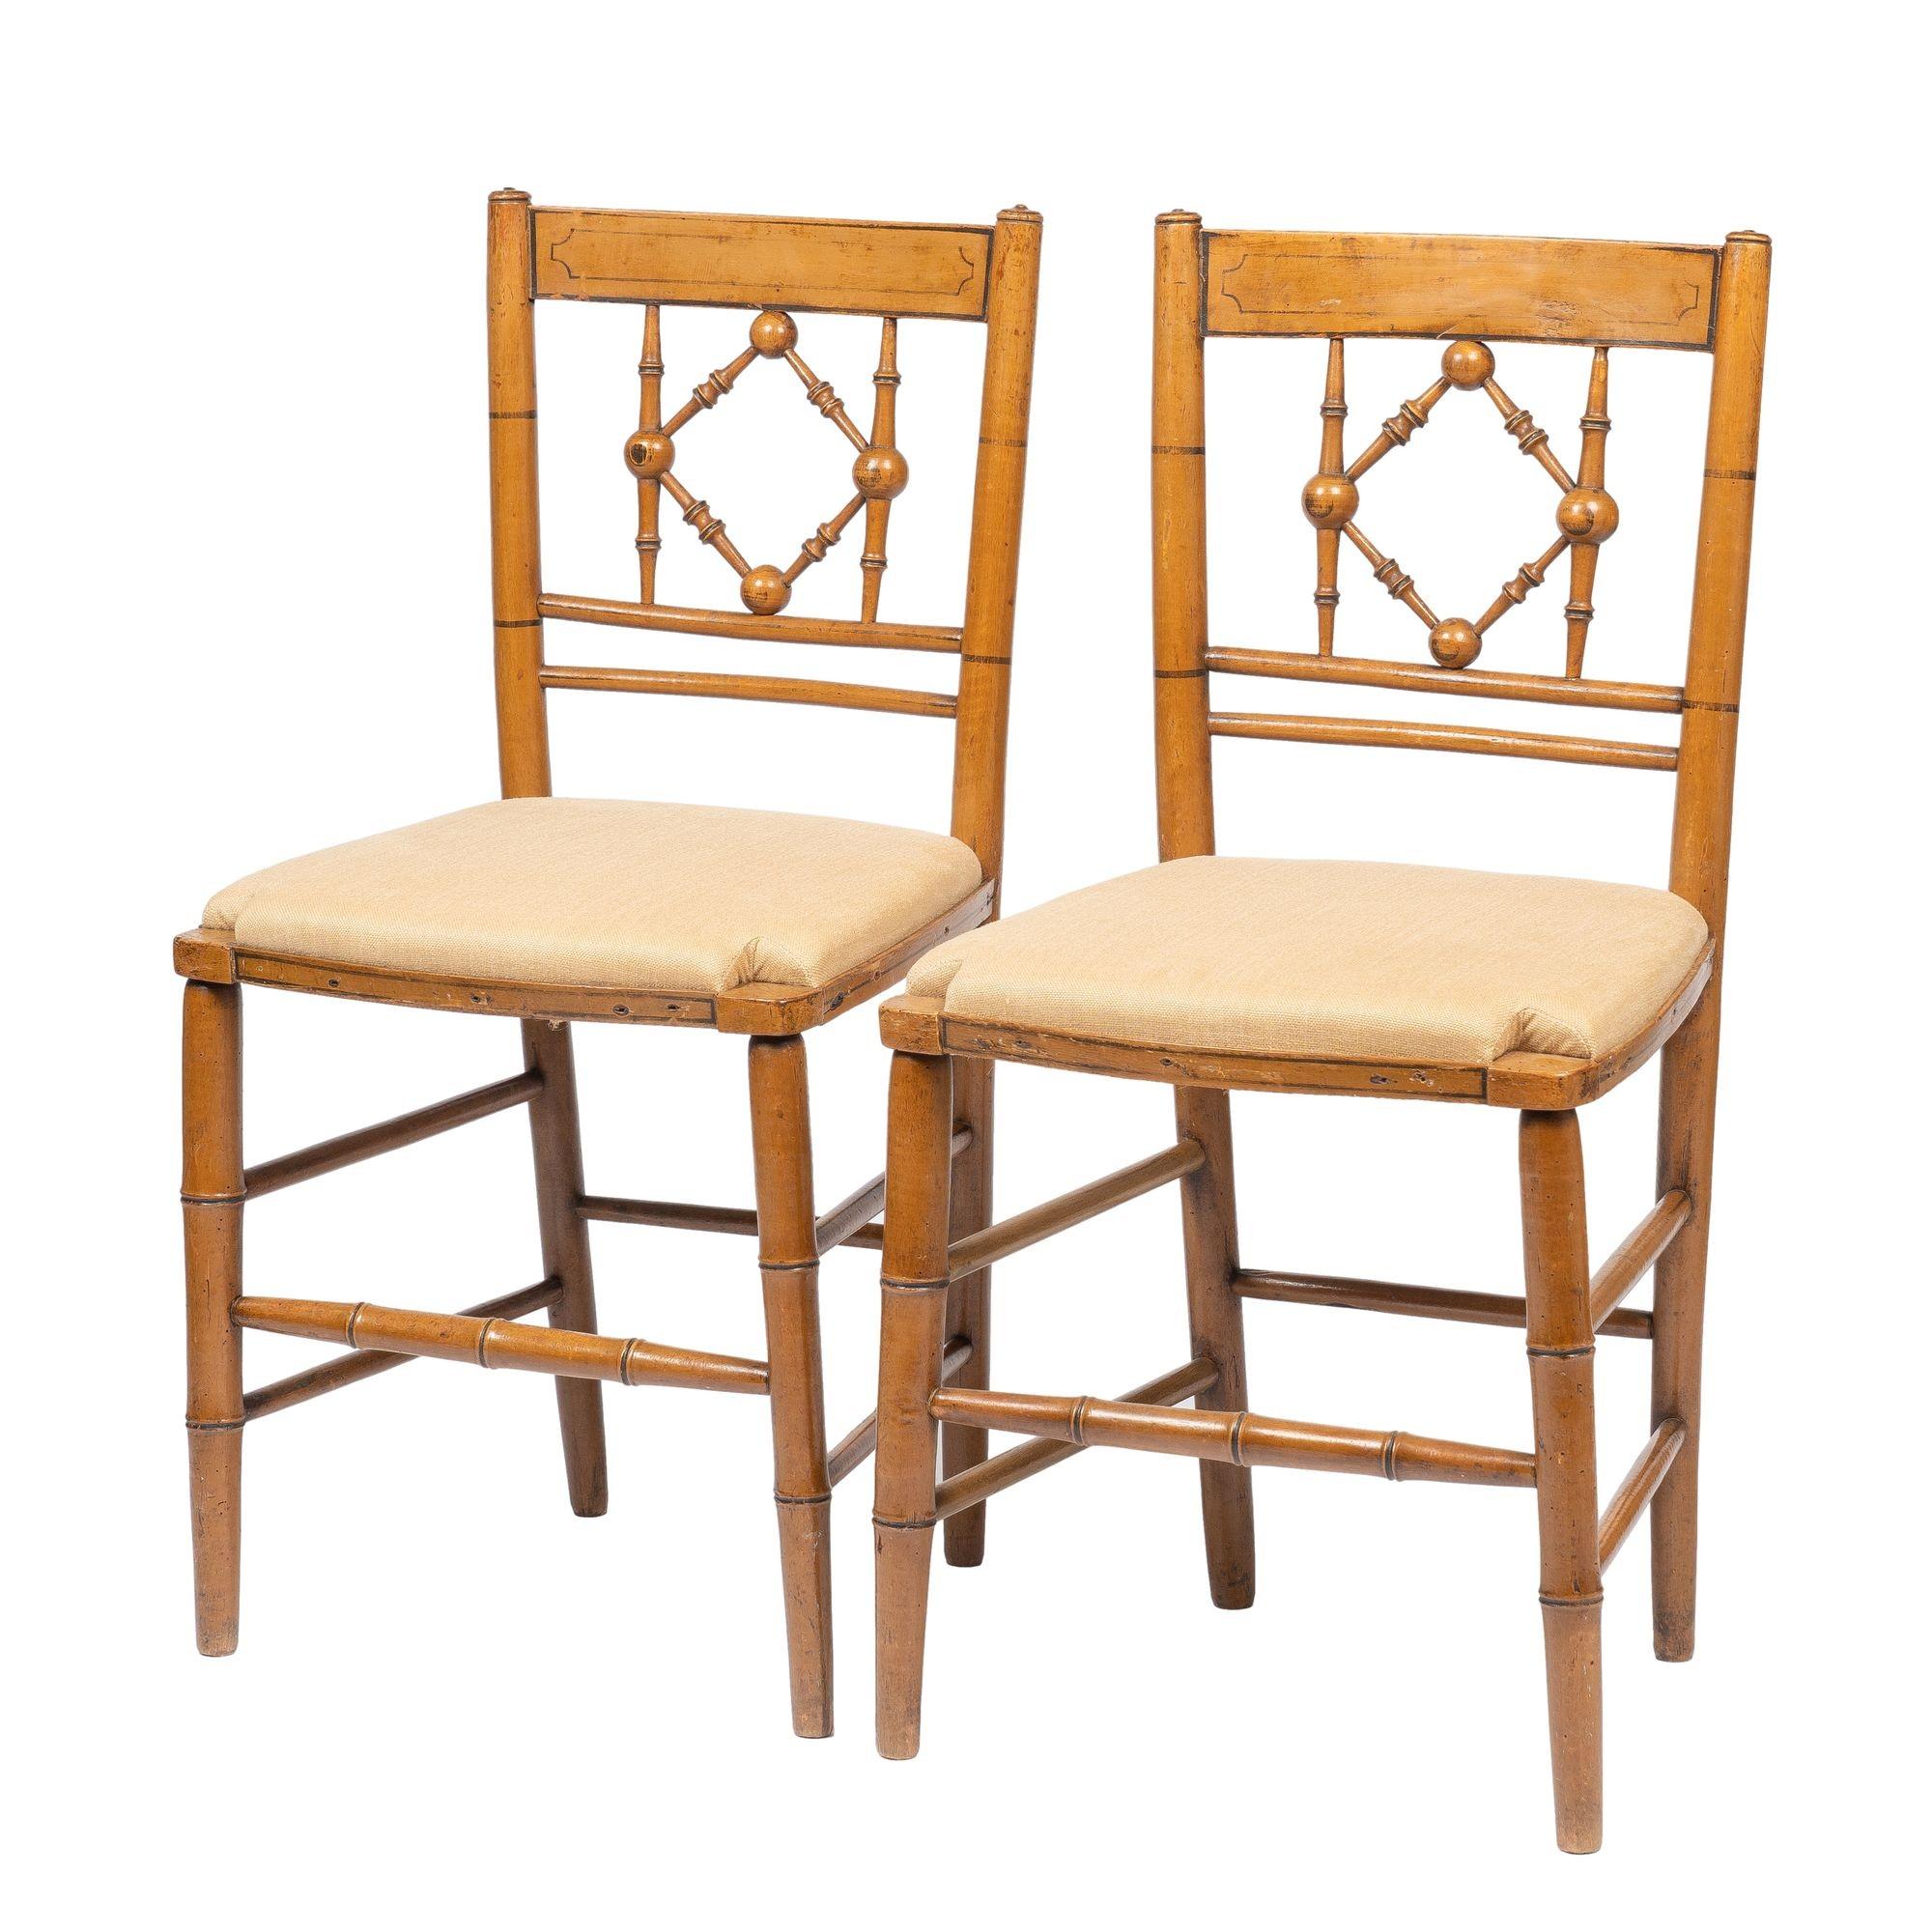 Pair of Sheraton mustard painted hard wood fancy chairs with black stripping. The rush seat frames have been refitted with upholstery.
American, Middle Atlantic, circa 1800.
 
Dimensions: 16-1/2” W x 17” D x 33” H
18-1/2” (seat height)
14-1/2”